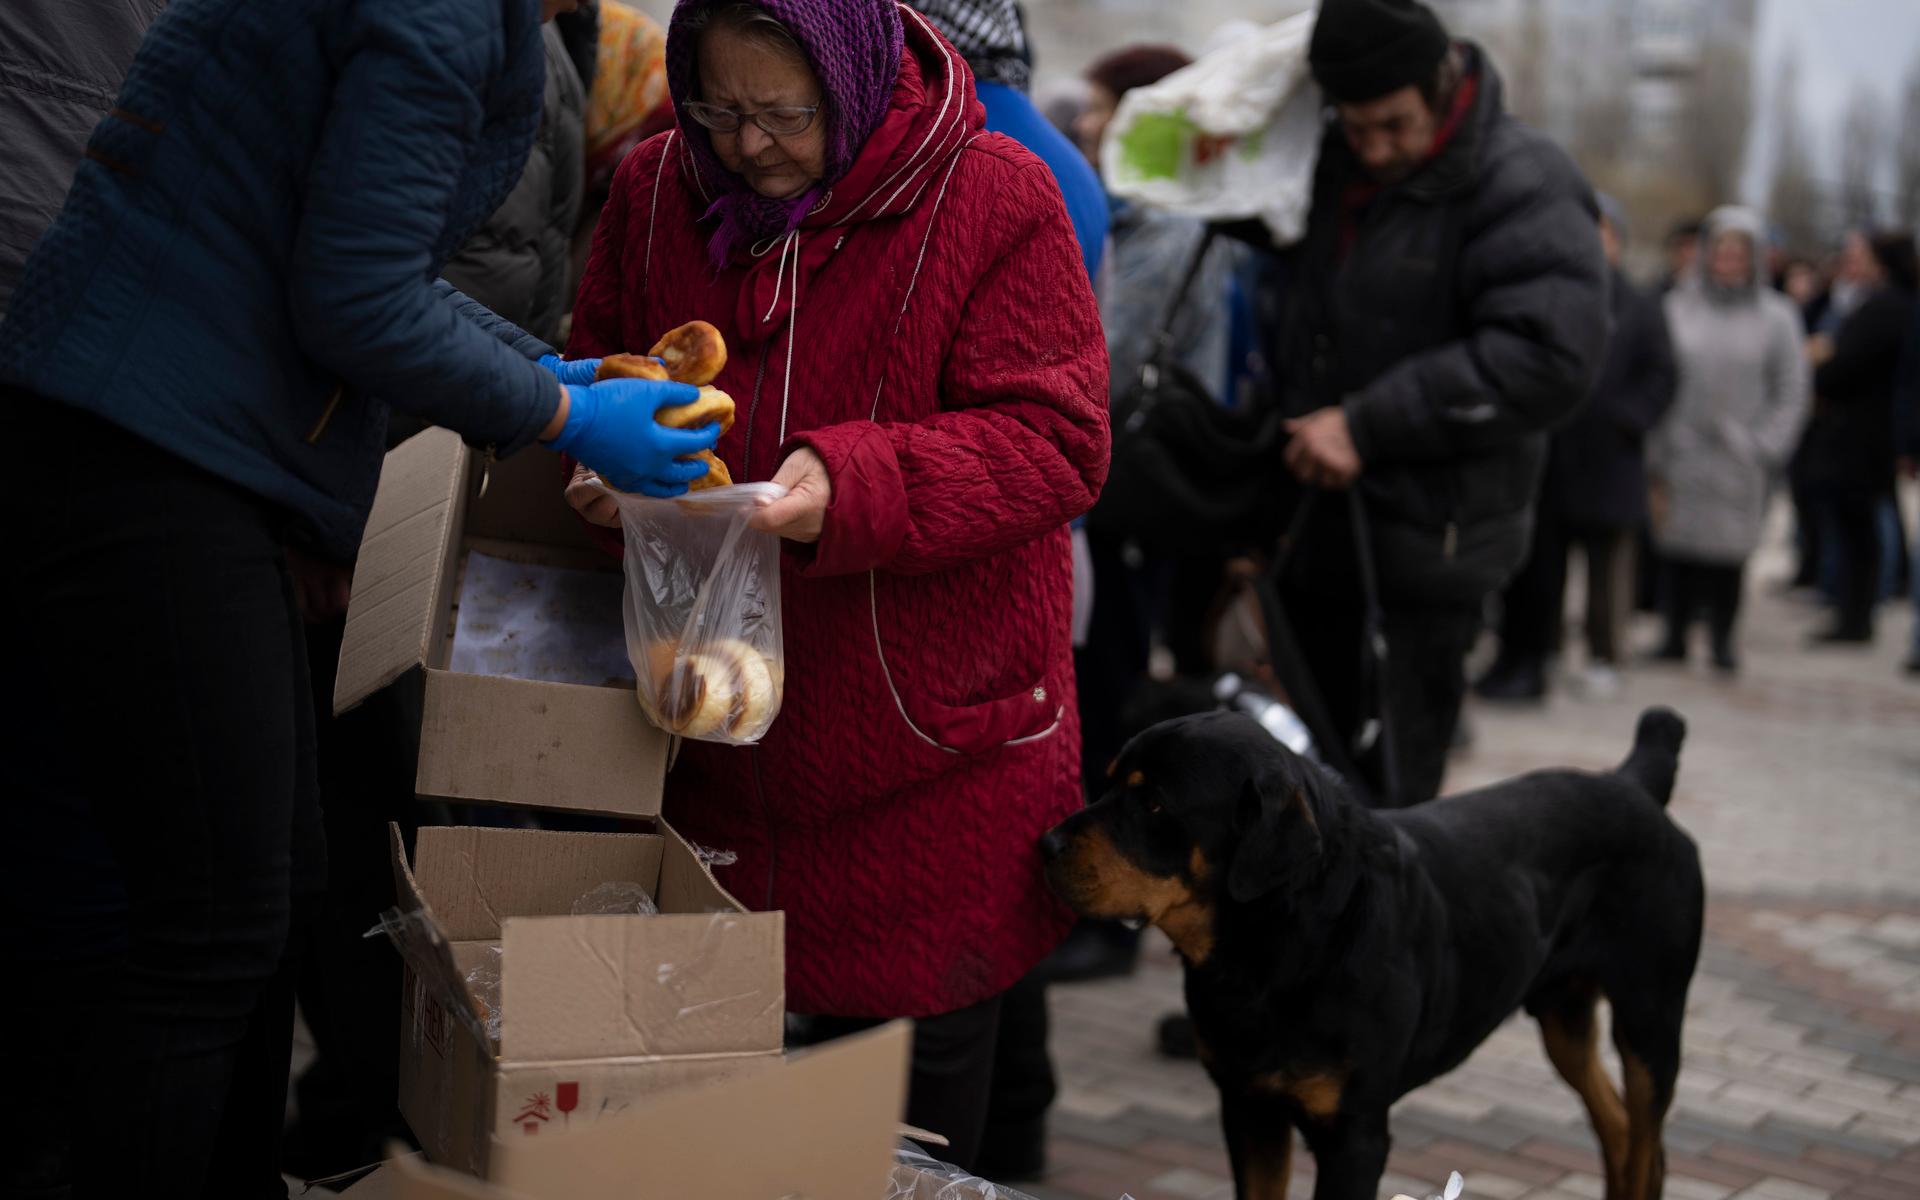 People receive food from a church in the town of Borodyanka, about 40 miles northwest of Kyiv, Ukraine, on Sunday, April 10, 2022. Several apartment buildings were destroyed during fighting between the Russian troops and the Ukrainian forces and the town is without electricity, water and heating. (AP Photo/Petros Giannakouris)  XPG108